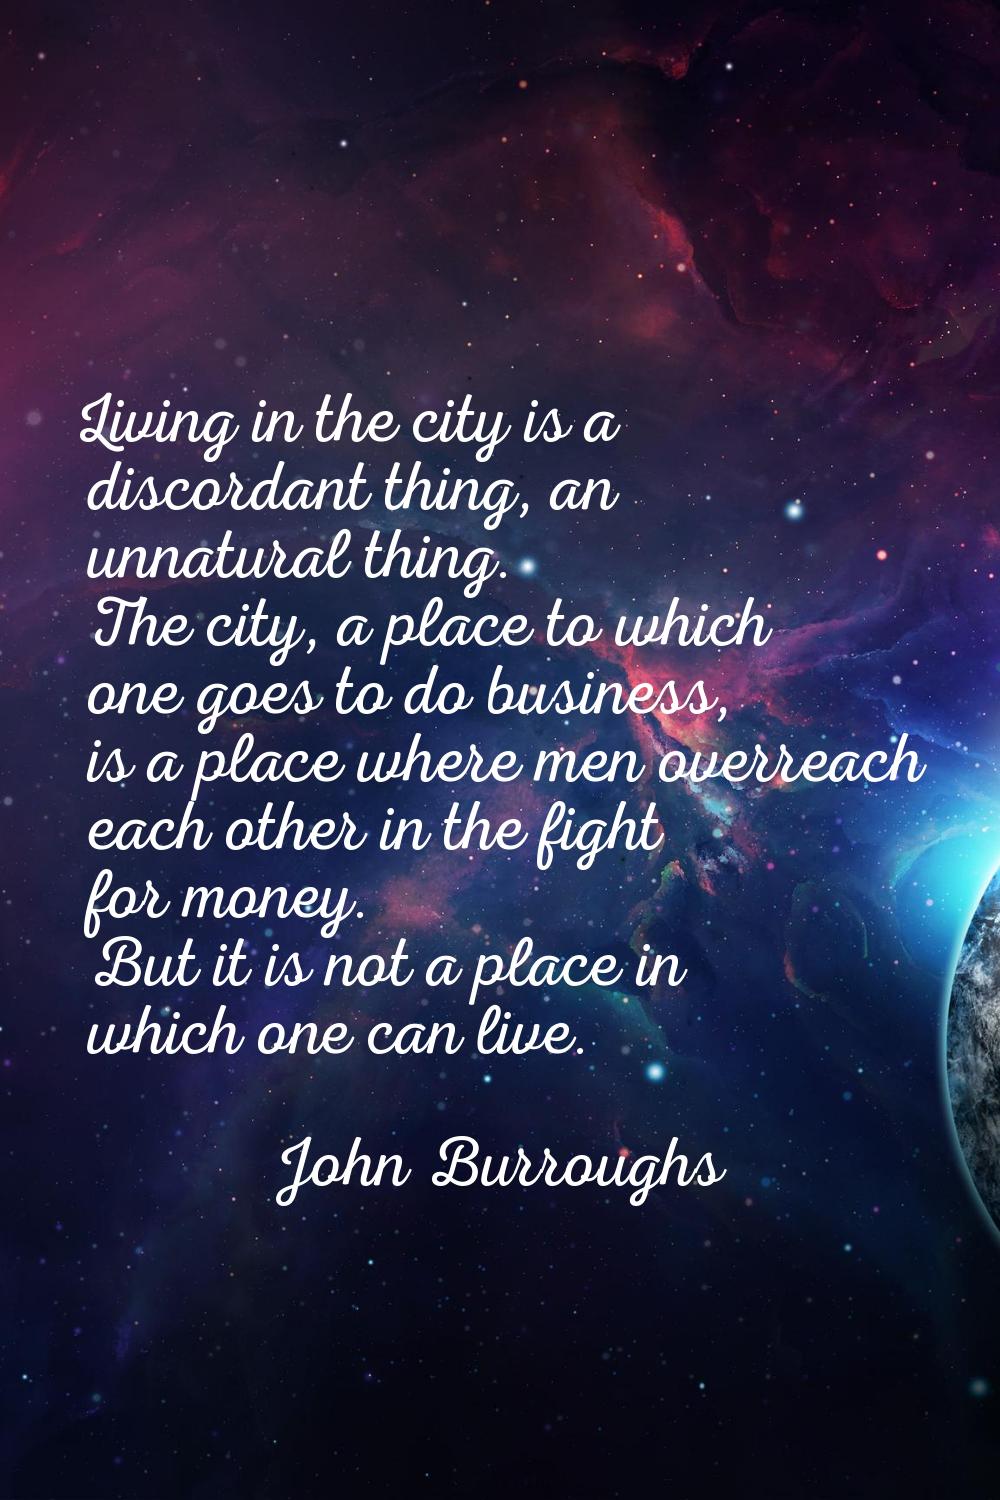 Living in the city is a discordant thing, an unnatural thing. The city, a place to which one goes t